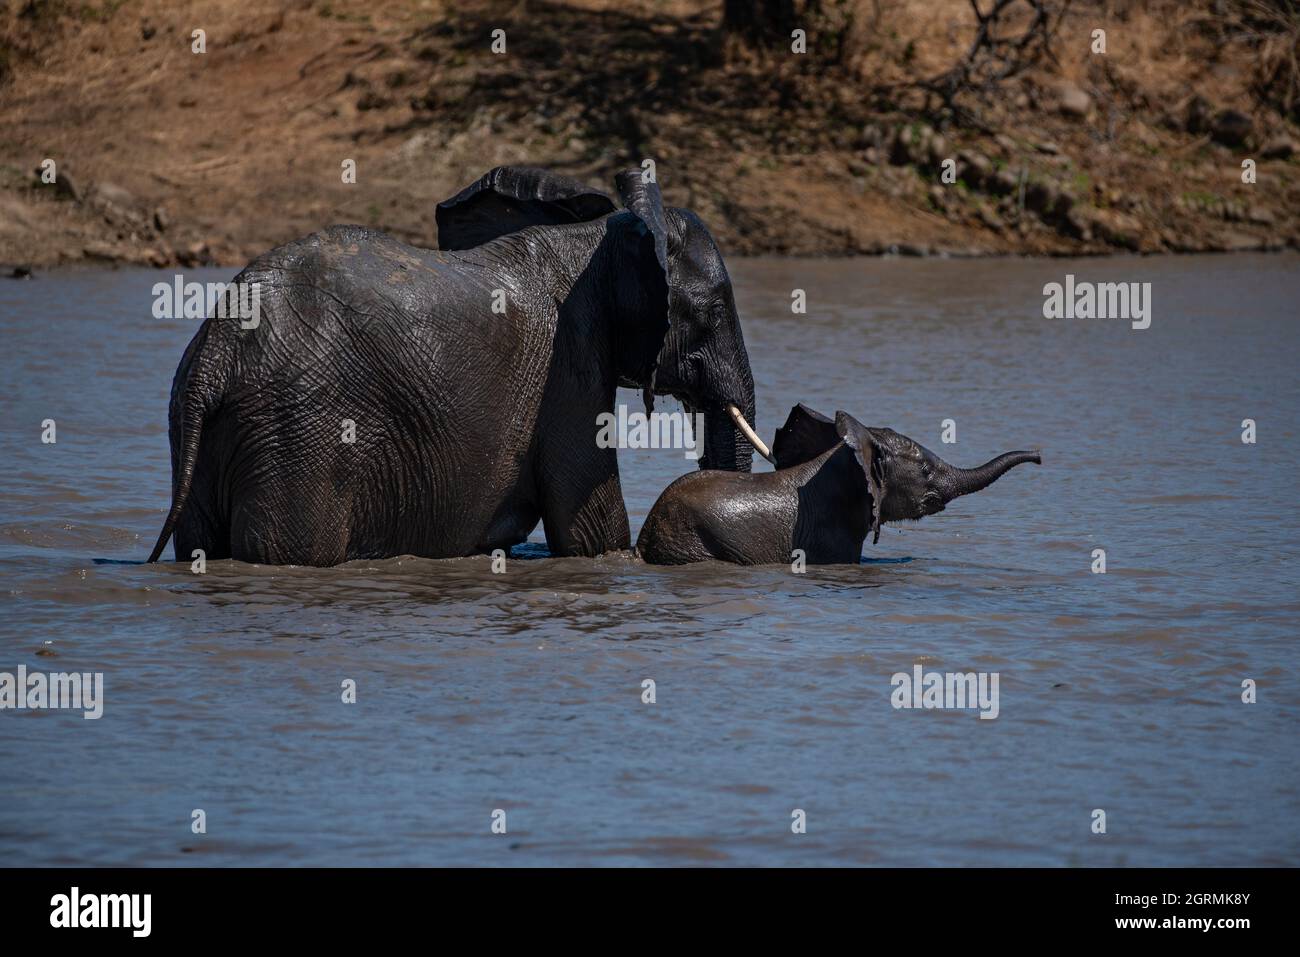 An elephant cow and her calf enjoying being in water on a hot day in the kruger national park Stock Photo